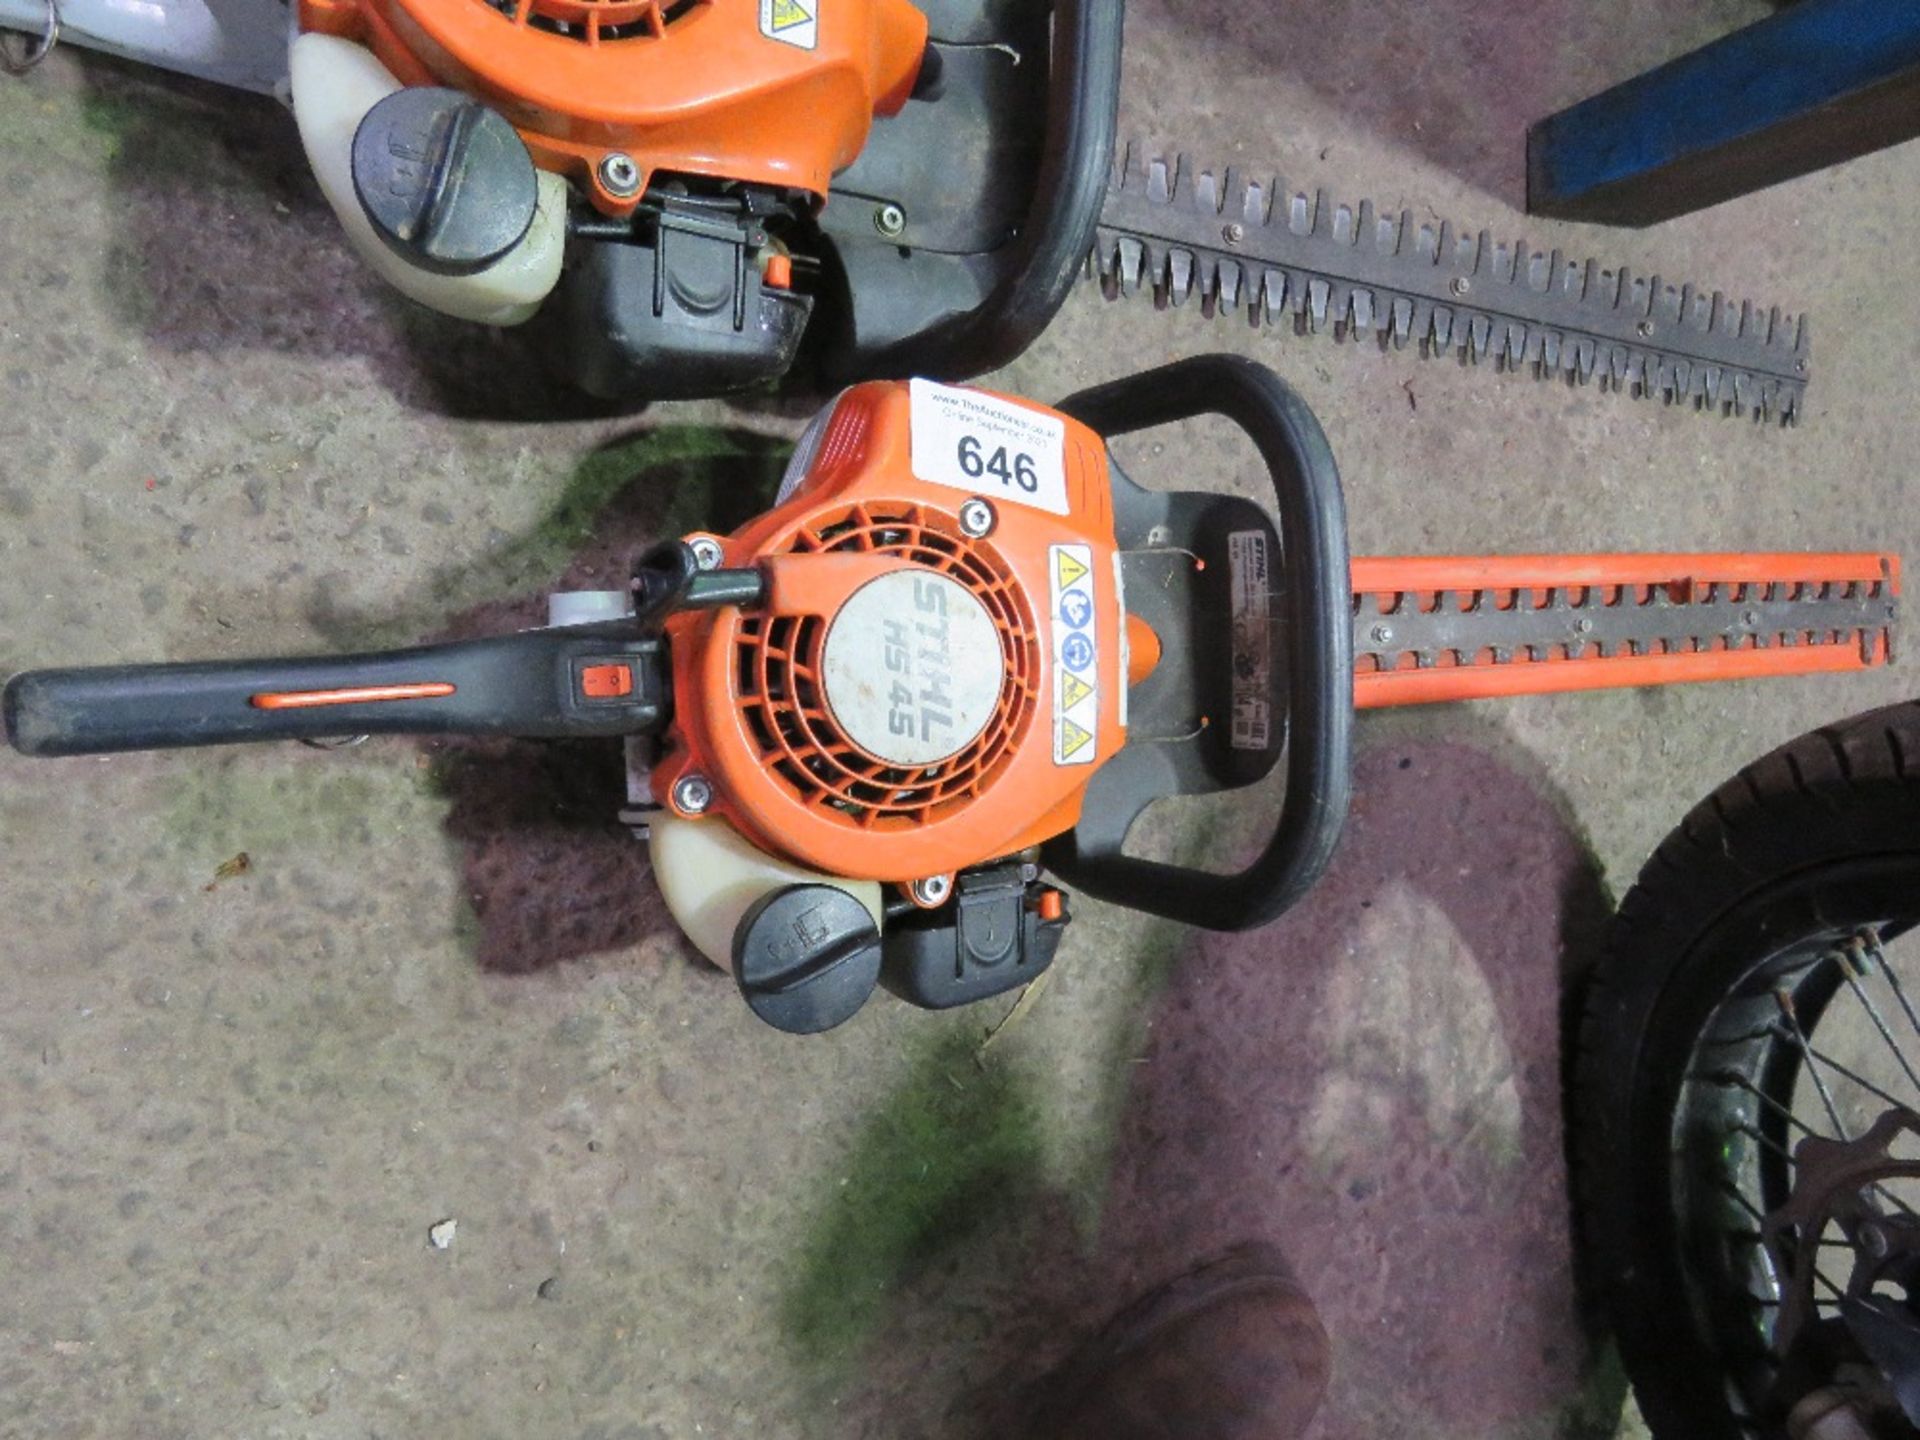 STIHL HS45 PETROL ENGINED PROFESSIONAL HEDGE CUTTER. DIRECT FROM LOCAL LANDSCAPE COMPANY WHO ARE CLO